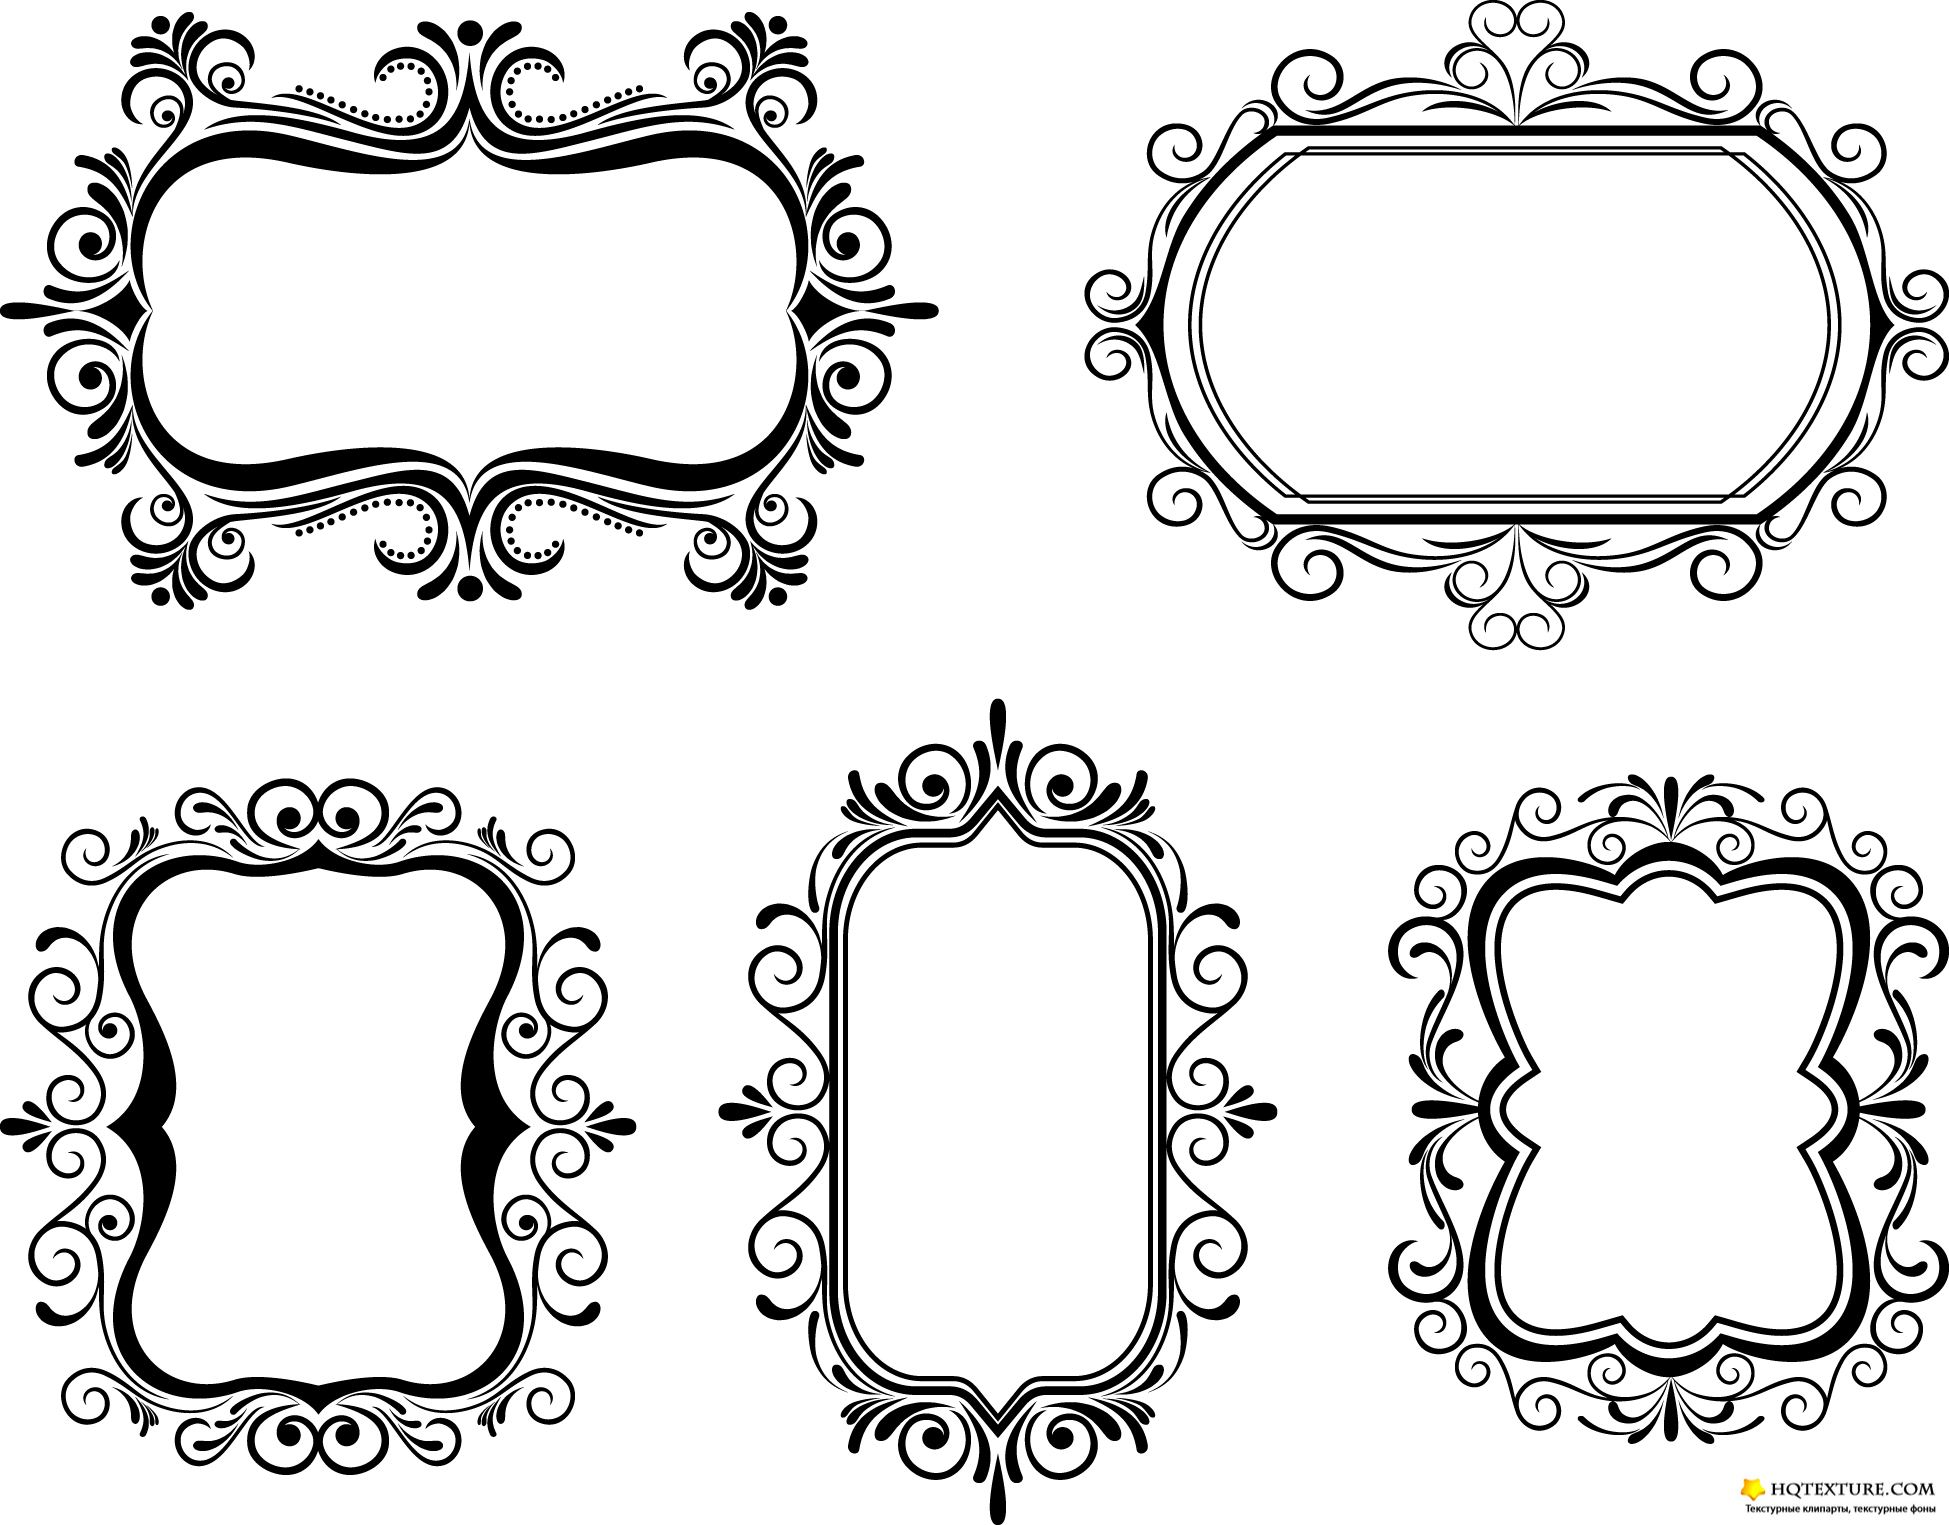 vector free download frame - photo #21